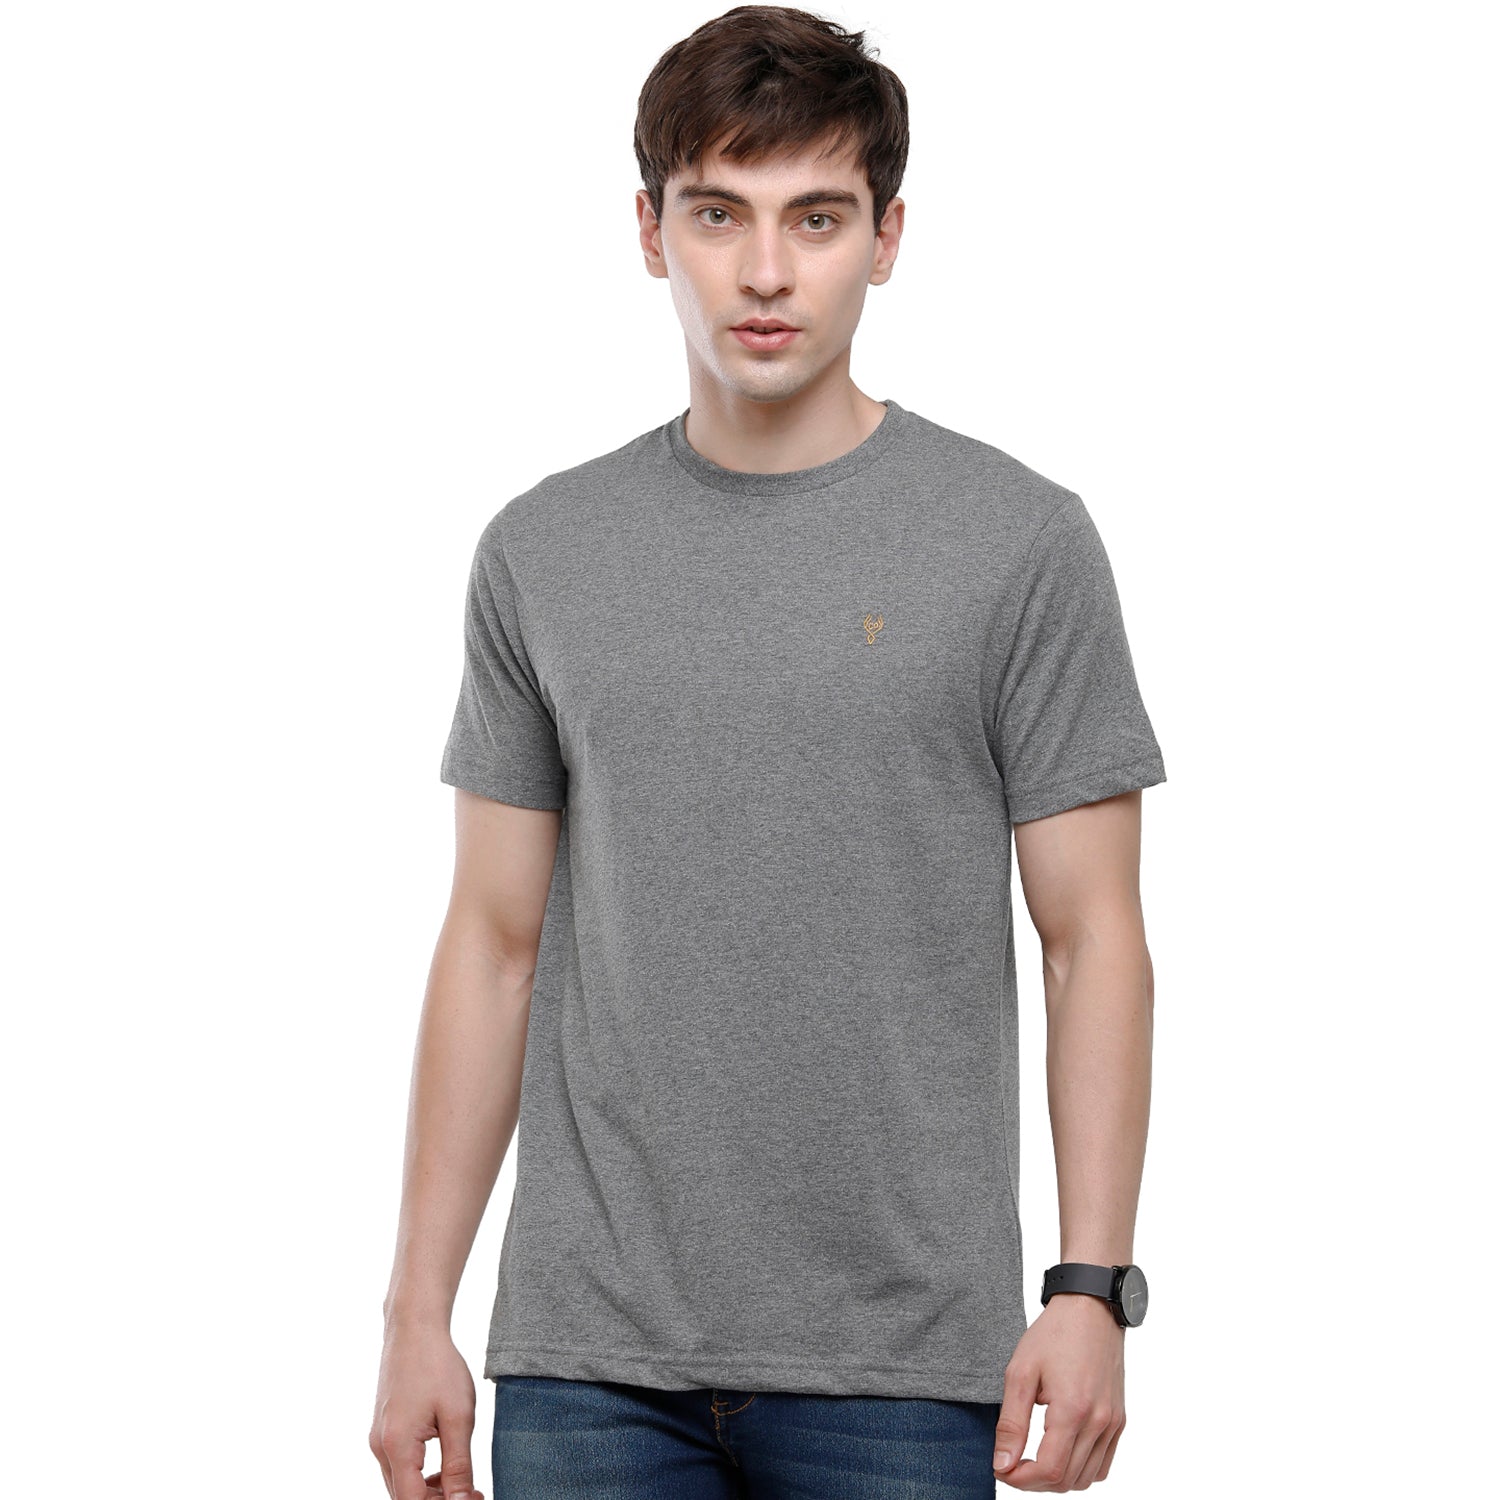 Classic Polo Men's Solid Single Jersey Grey Half Sleeve Slim Fit T-Shirt - Kore-12 T-shirt Classic Polo 